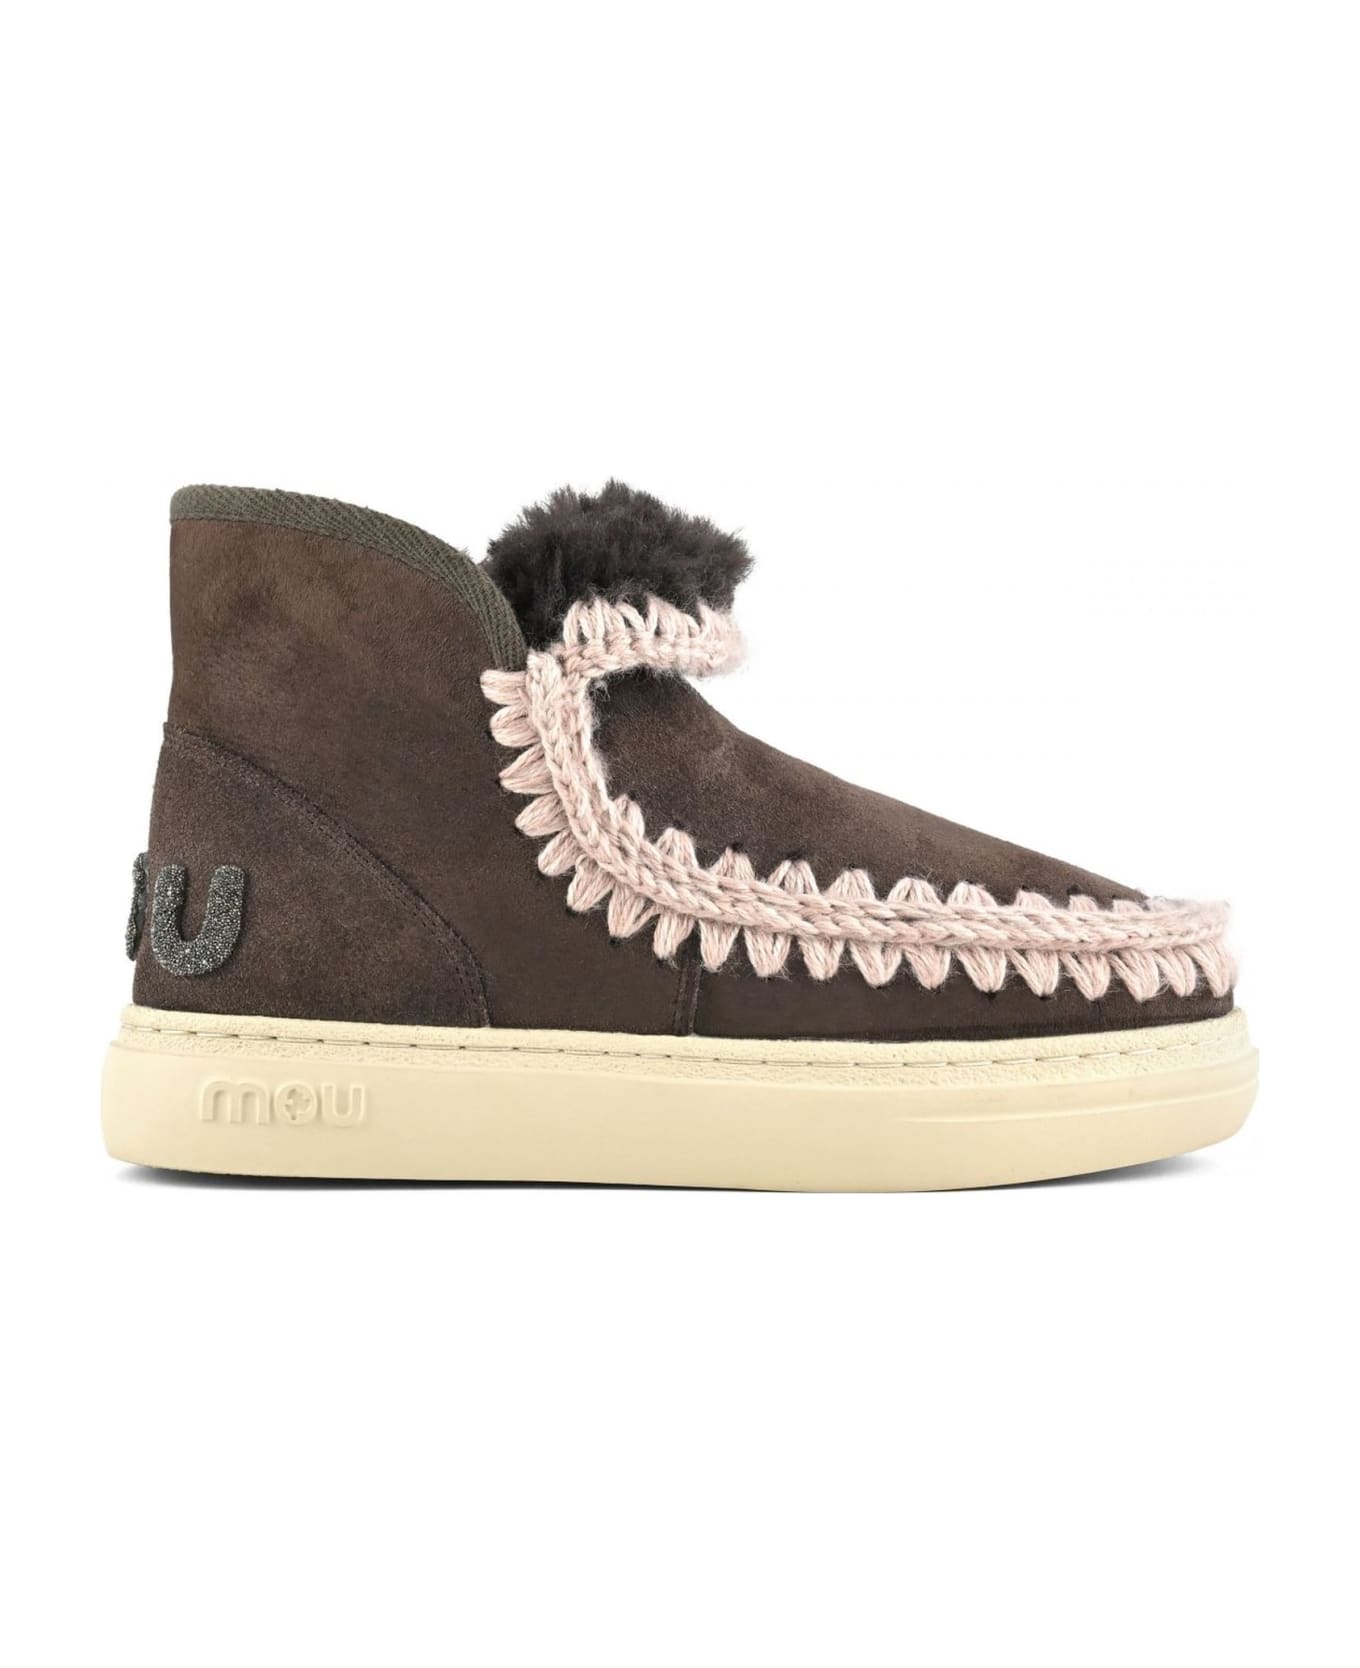 Mou Eskimo Sneaker Bold In Brown Leather - Brown スニーカー